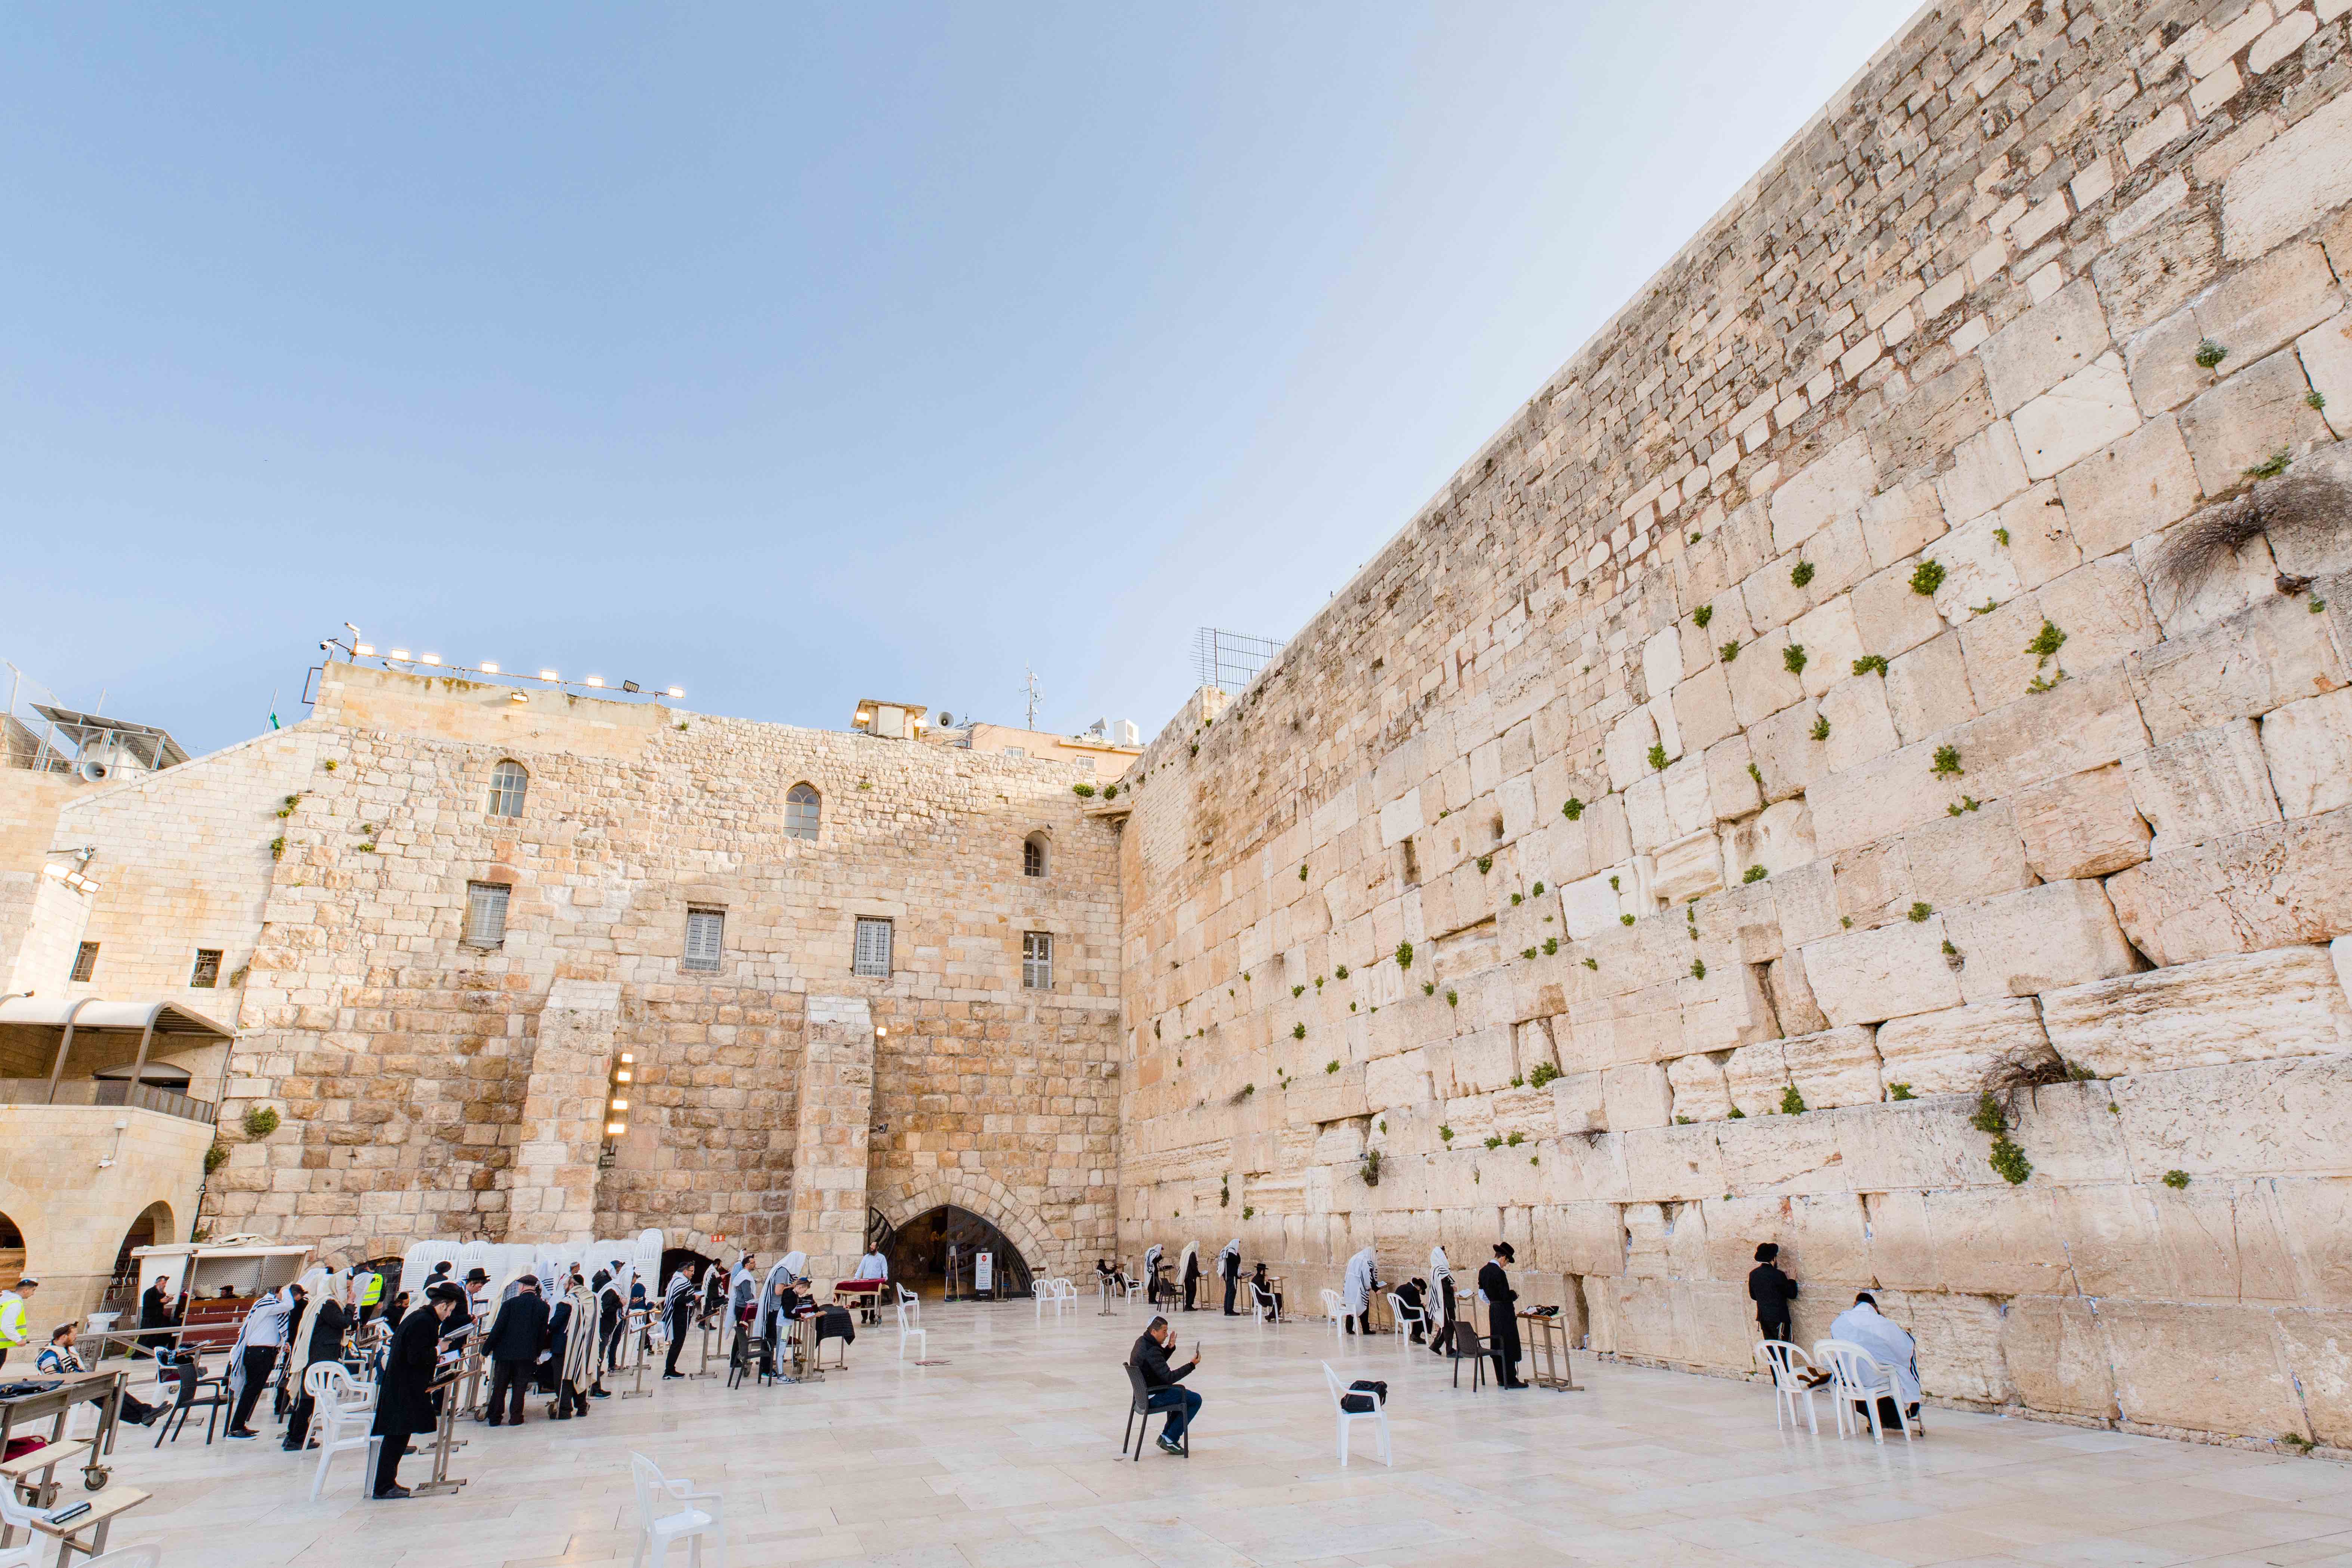 Travelers alongside locals pray at the iconic Western Wall